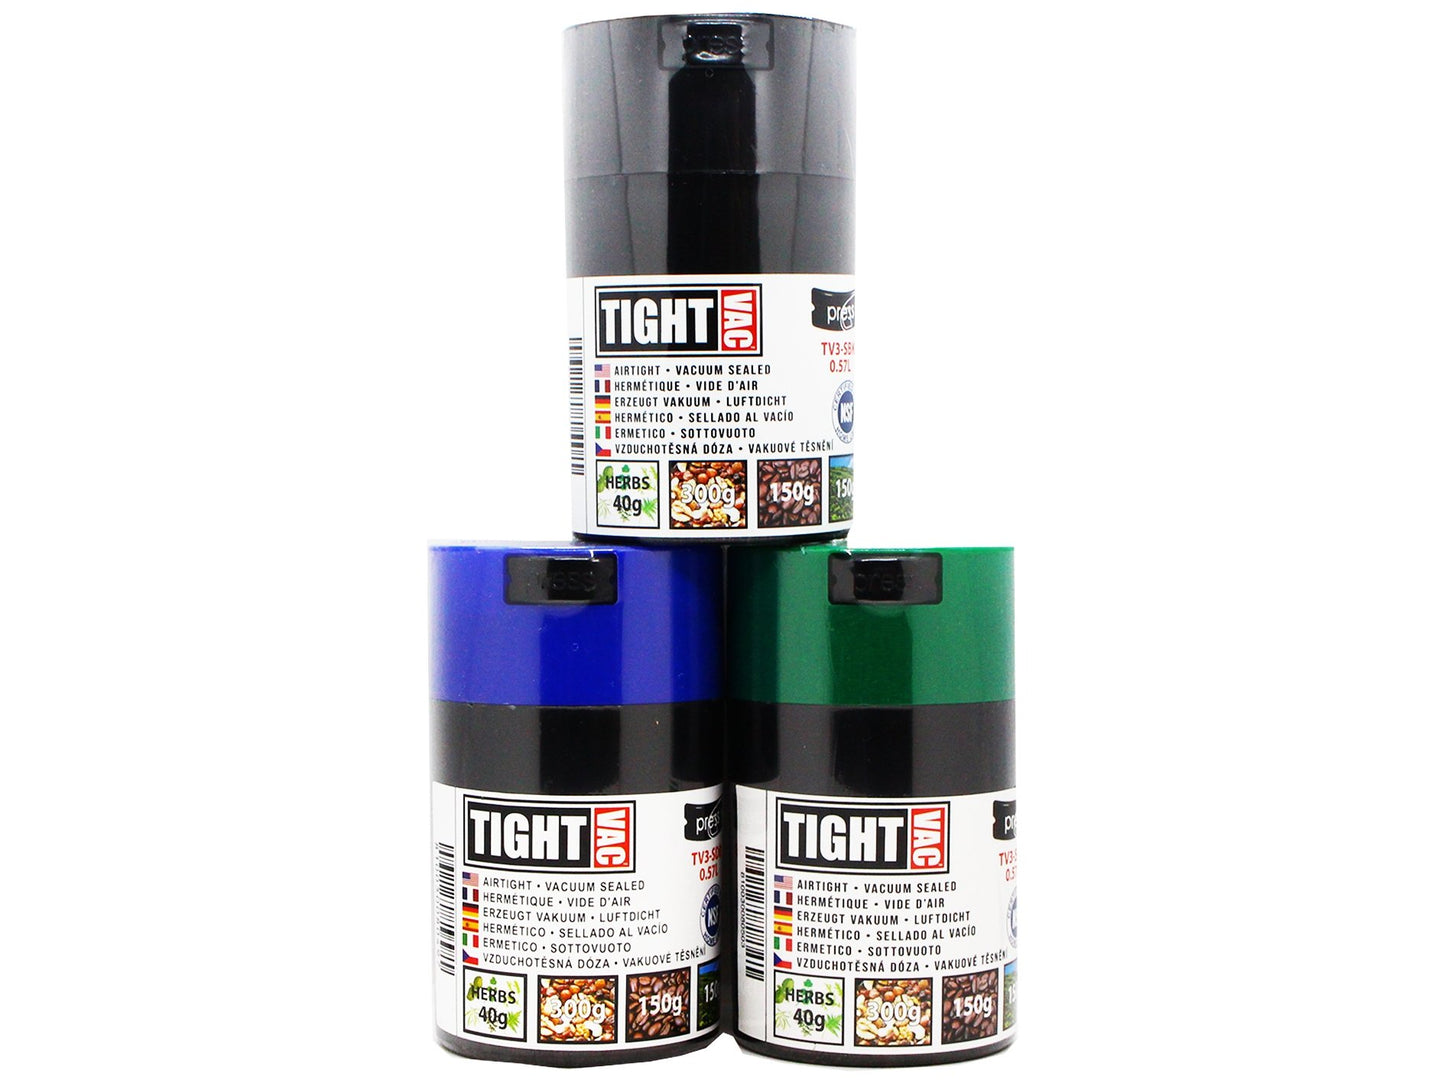 TIGHT VAC Airtight Container 0.57 Litre (Colours May Vary) - VIR Wholesale